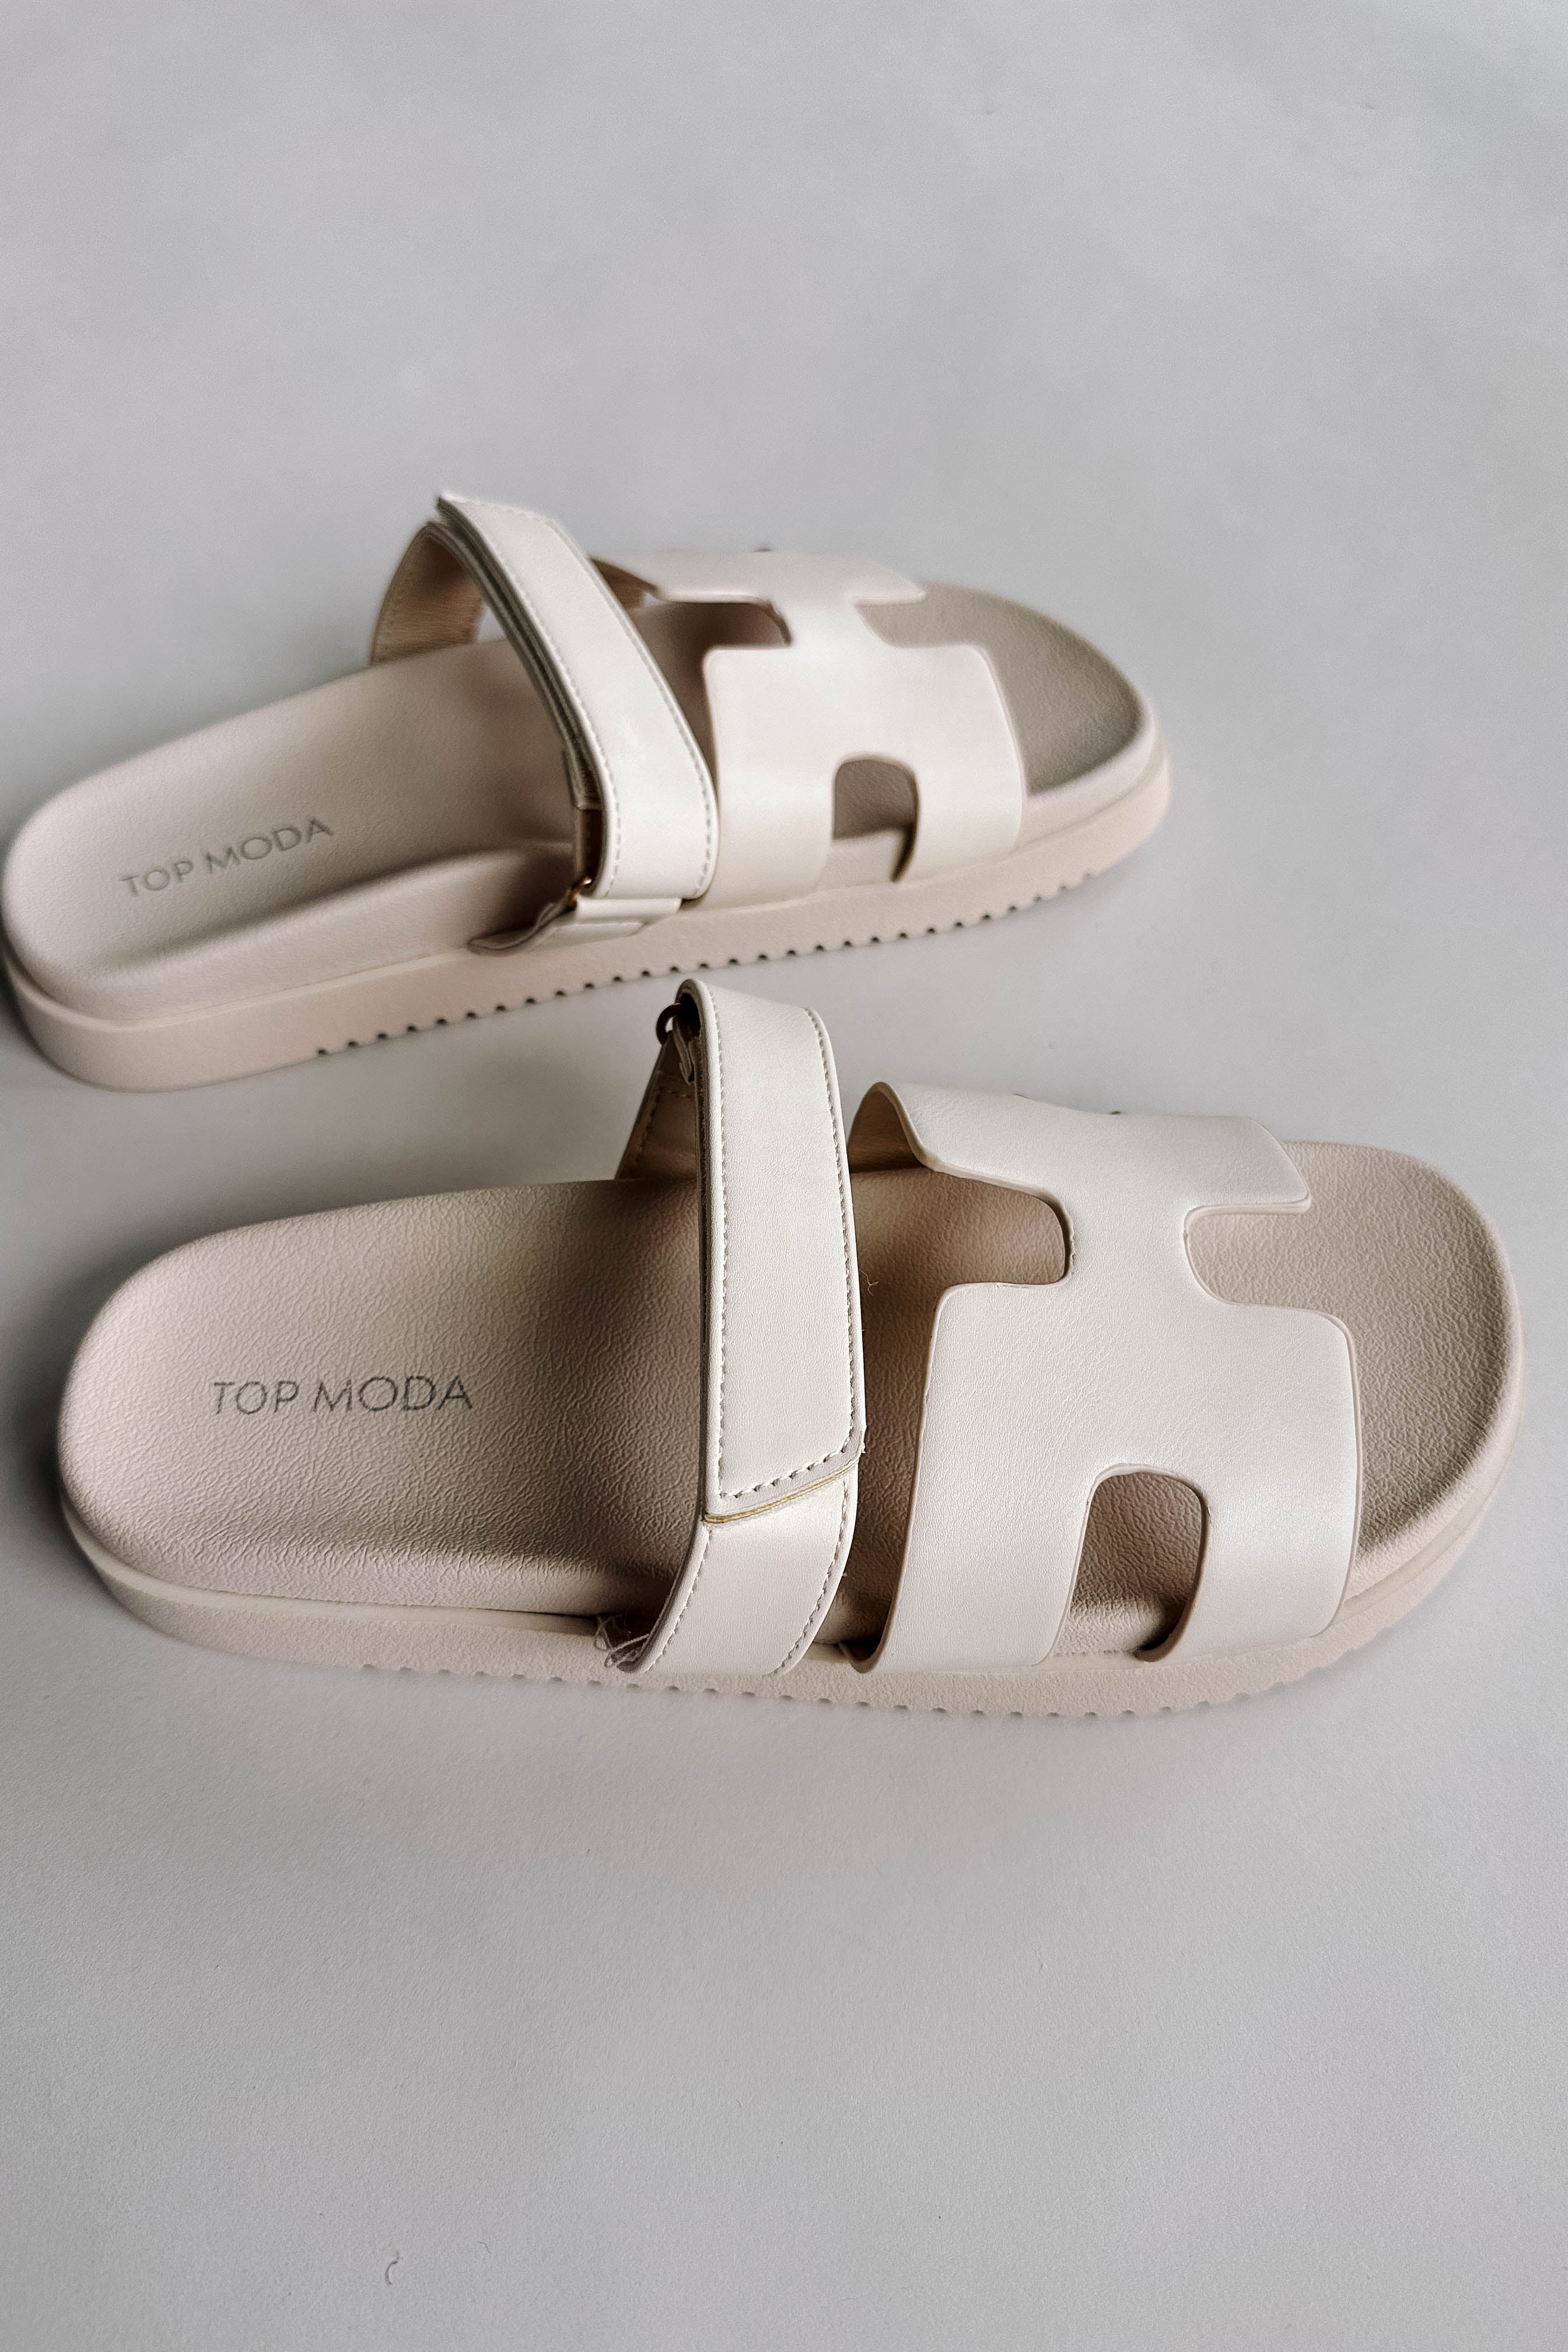 Side view of the Jade Strap Sandal in Ivory which features ivory leather fabric, slide-on style, H-shaped strap, adjustable velcro strap and round toe.